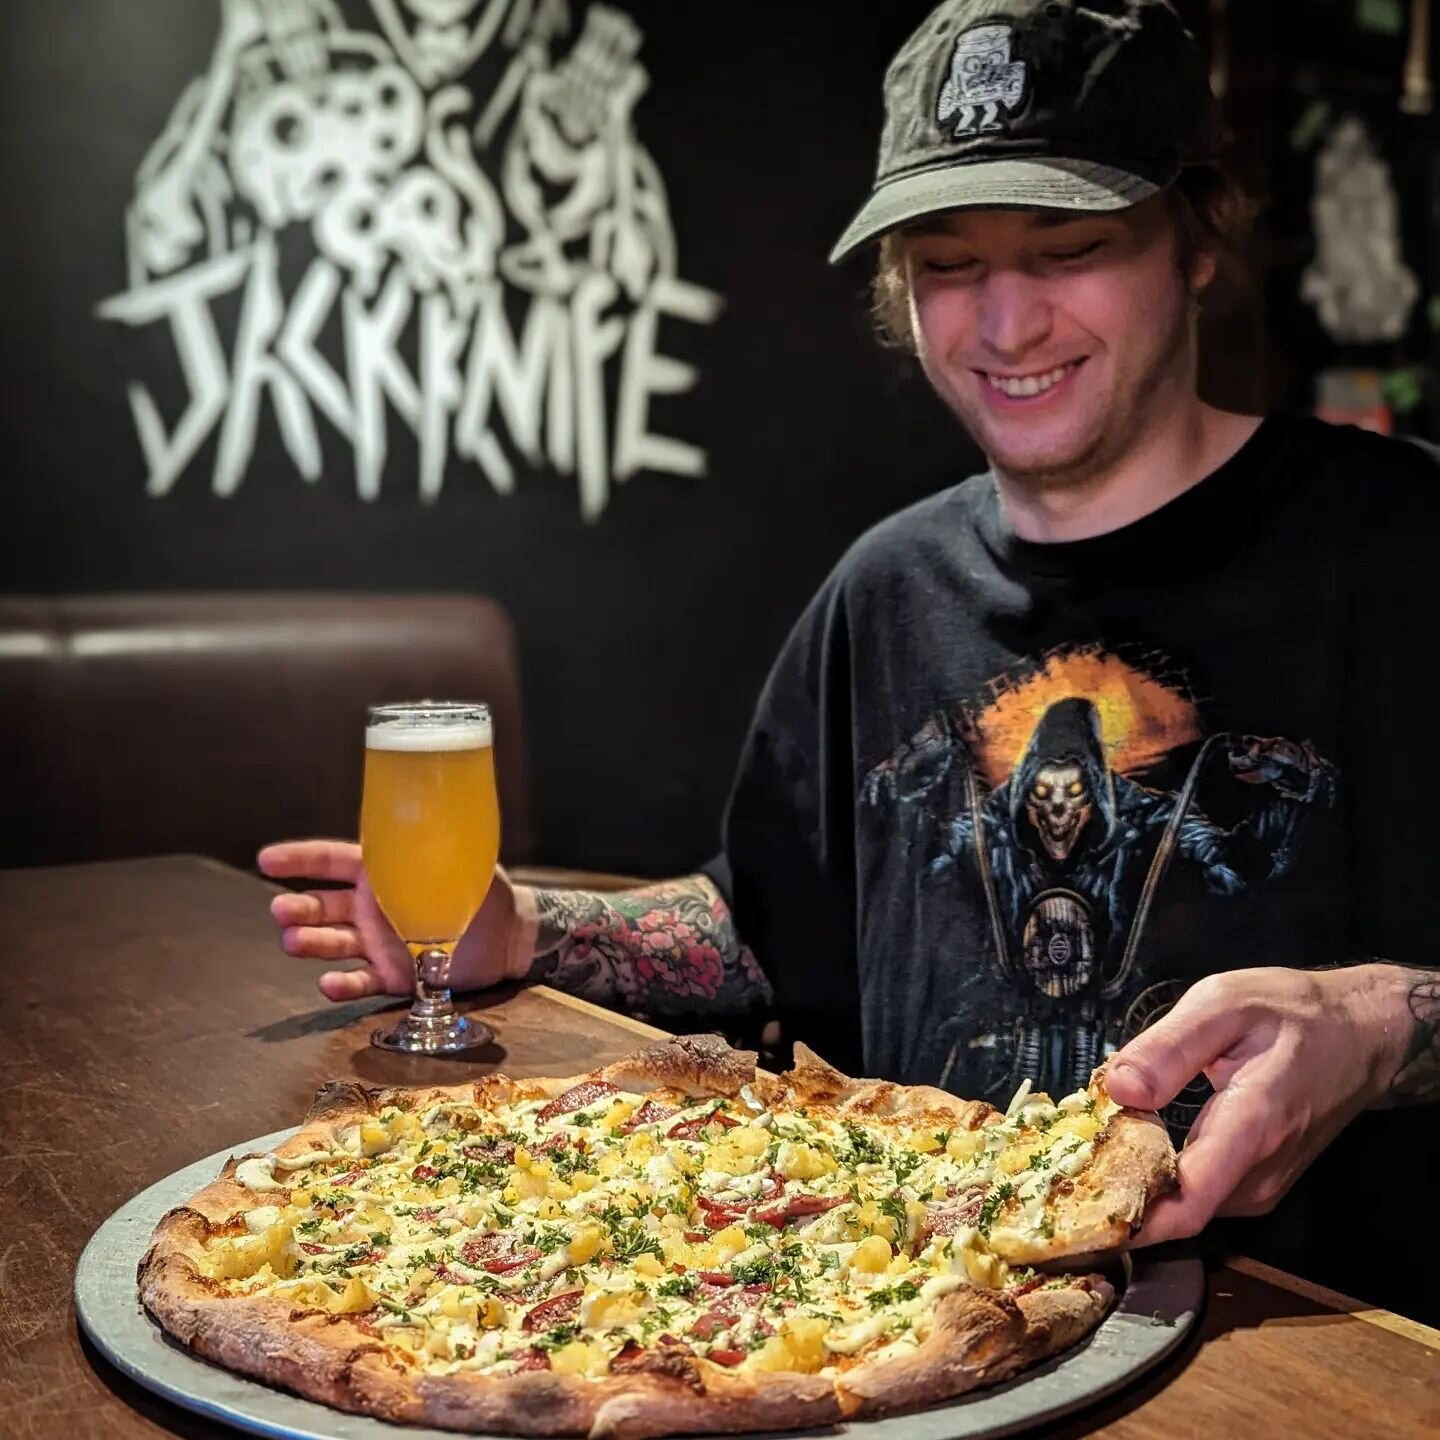 Friends! Swing on by your favourite neighbourhood dungeon this week to grab one of our featured zzas! Like the PAGANIZER, think pierogi, but zzaaa!
🍕🔥🍕🔥🍕
Pair it with a glass of J&Ouml;TNAR, our collab with our buds from @ironroadbrewing a barre